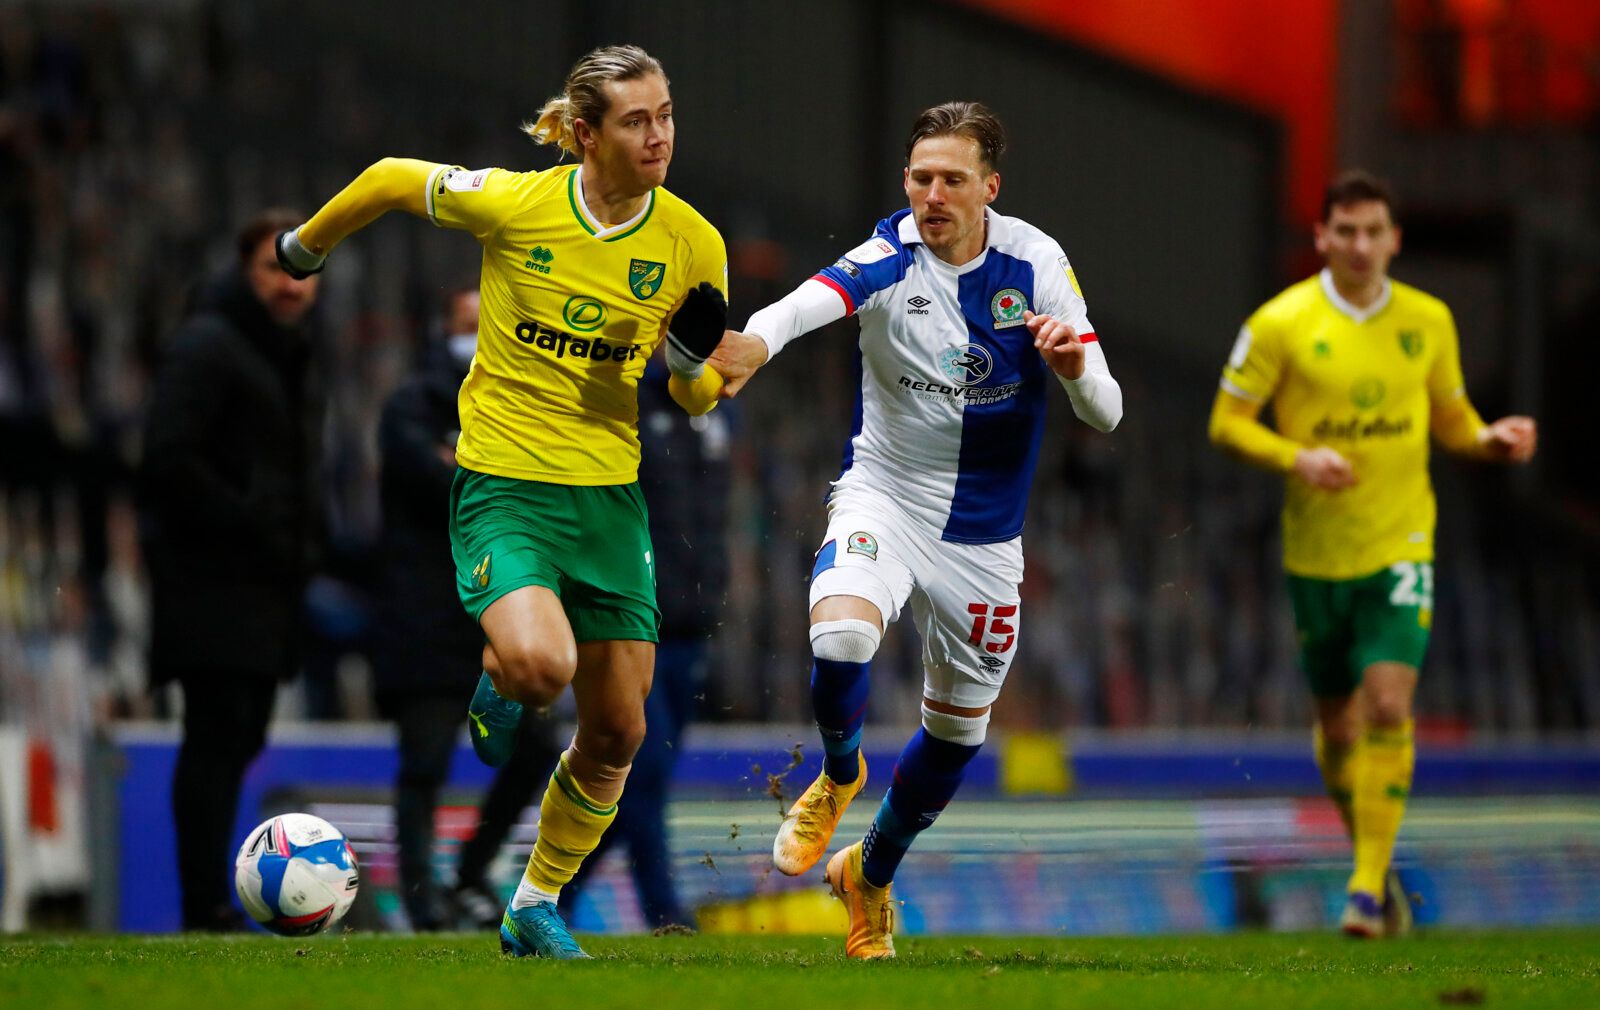 Soccer Football - Championship - Blackburn Rovers v Norwich City - Ewood Park, Blackburn, Britain - December 12, 2020 Norwich City's Todd Cantwell in action with Blackburn Rovers' Barry Douglas Action Images/Jason Cairnduff EDITORIAL USE ONLY. No use with unauthorized audio, video, data, fixture lists, club/league logos or 'live' services. Online in-match use limited to 75 images, no video emulation. No use in betting, games or single club /league/player publications.  Please contact your accoun